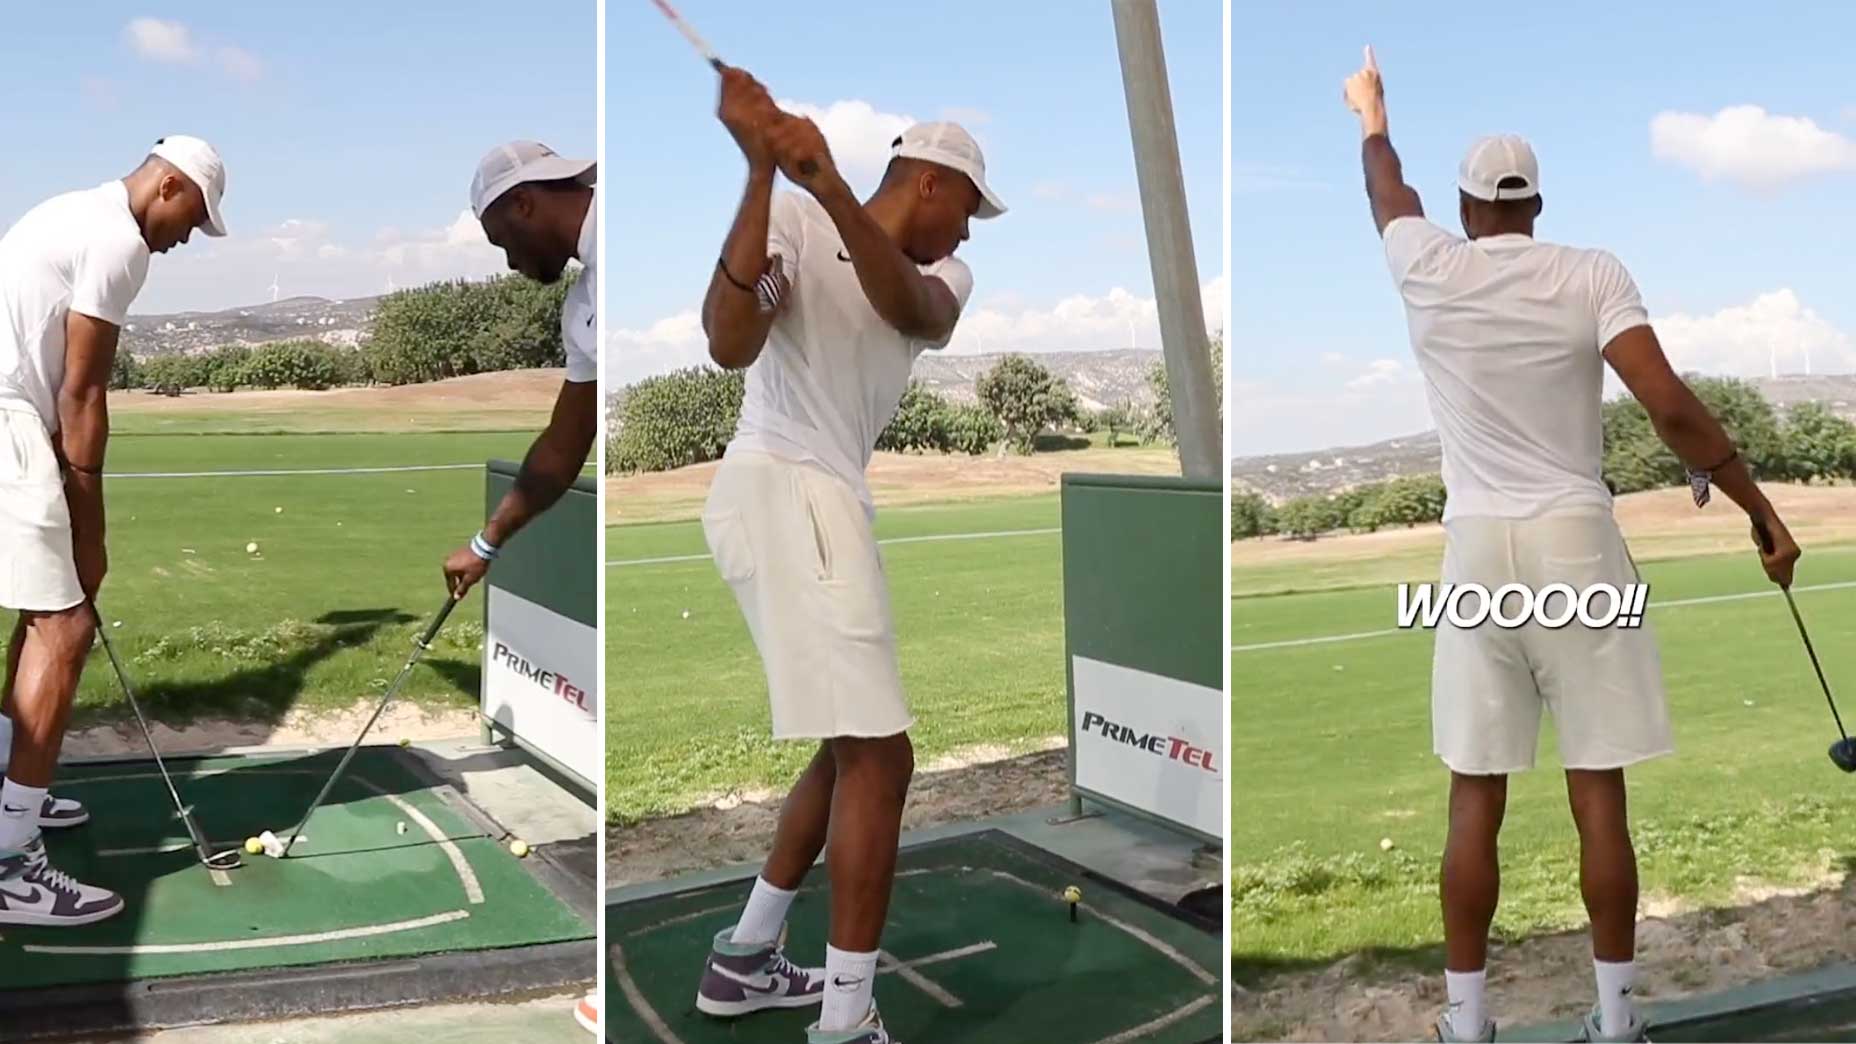 The newest owner in Tiger Woods’ golf league might surprise you